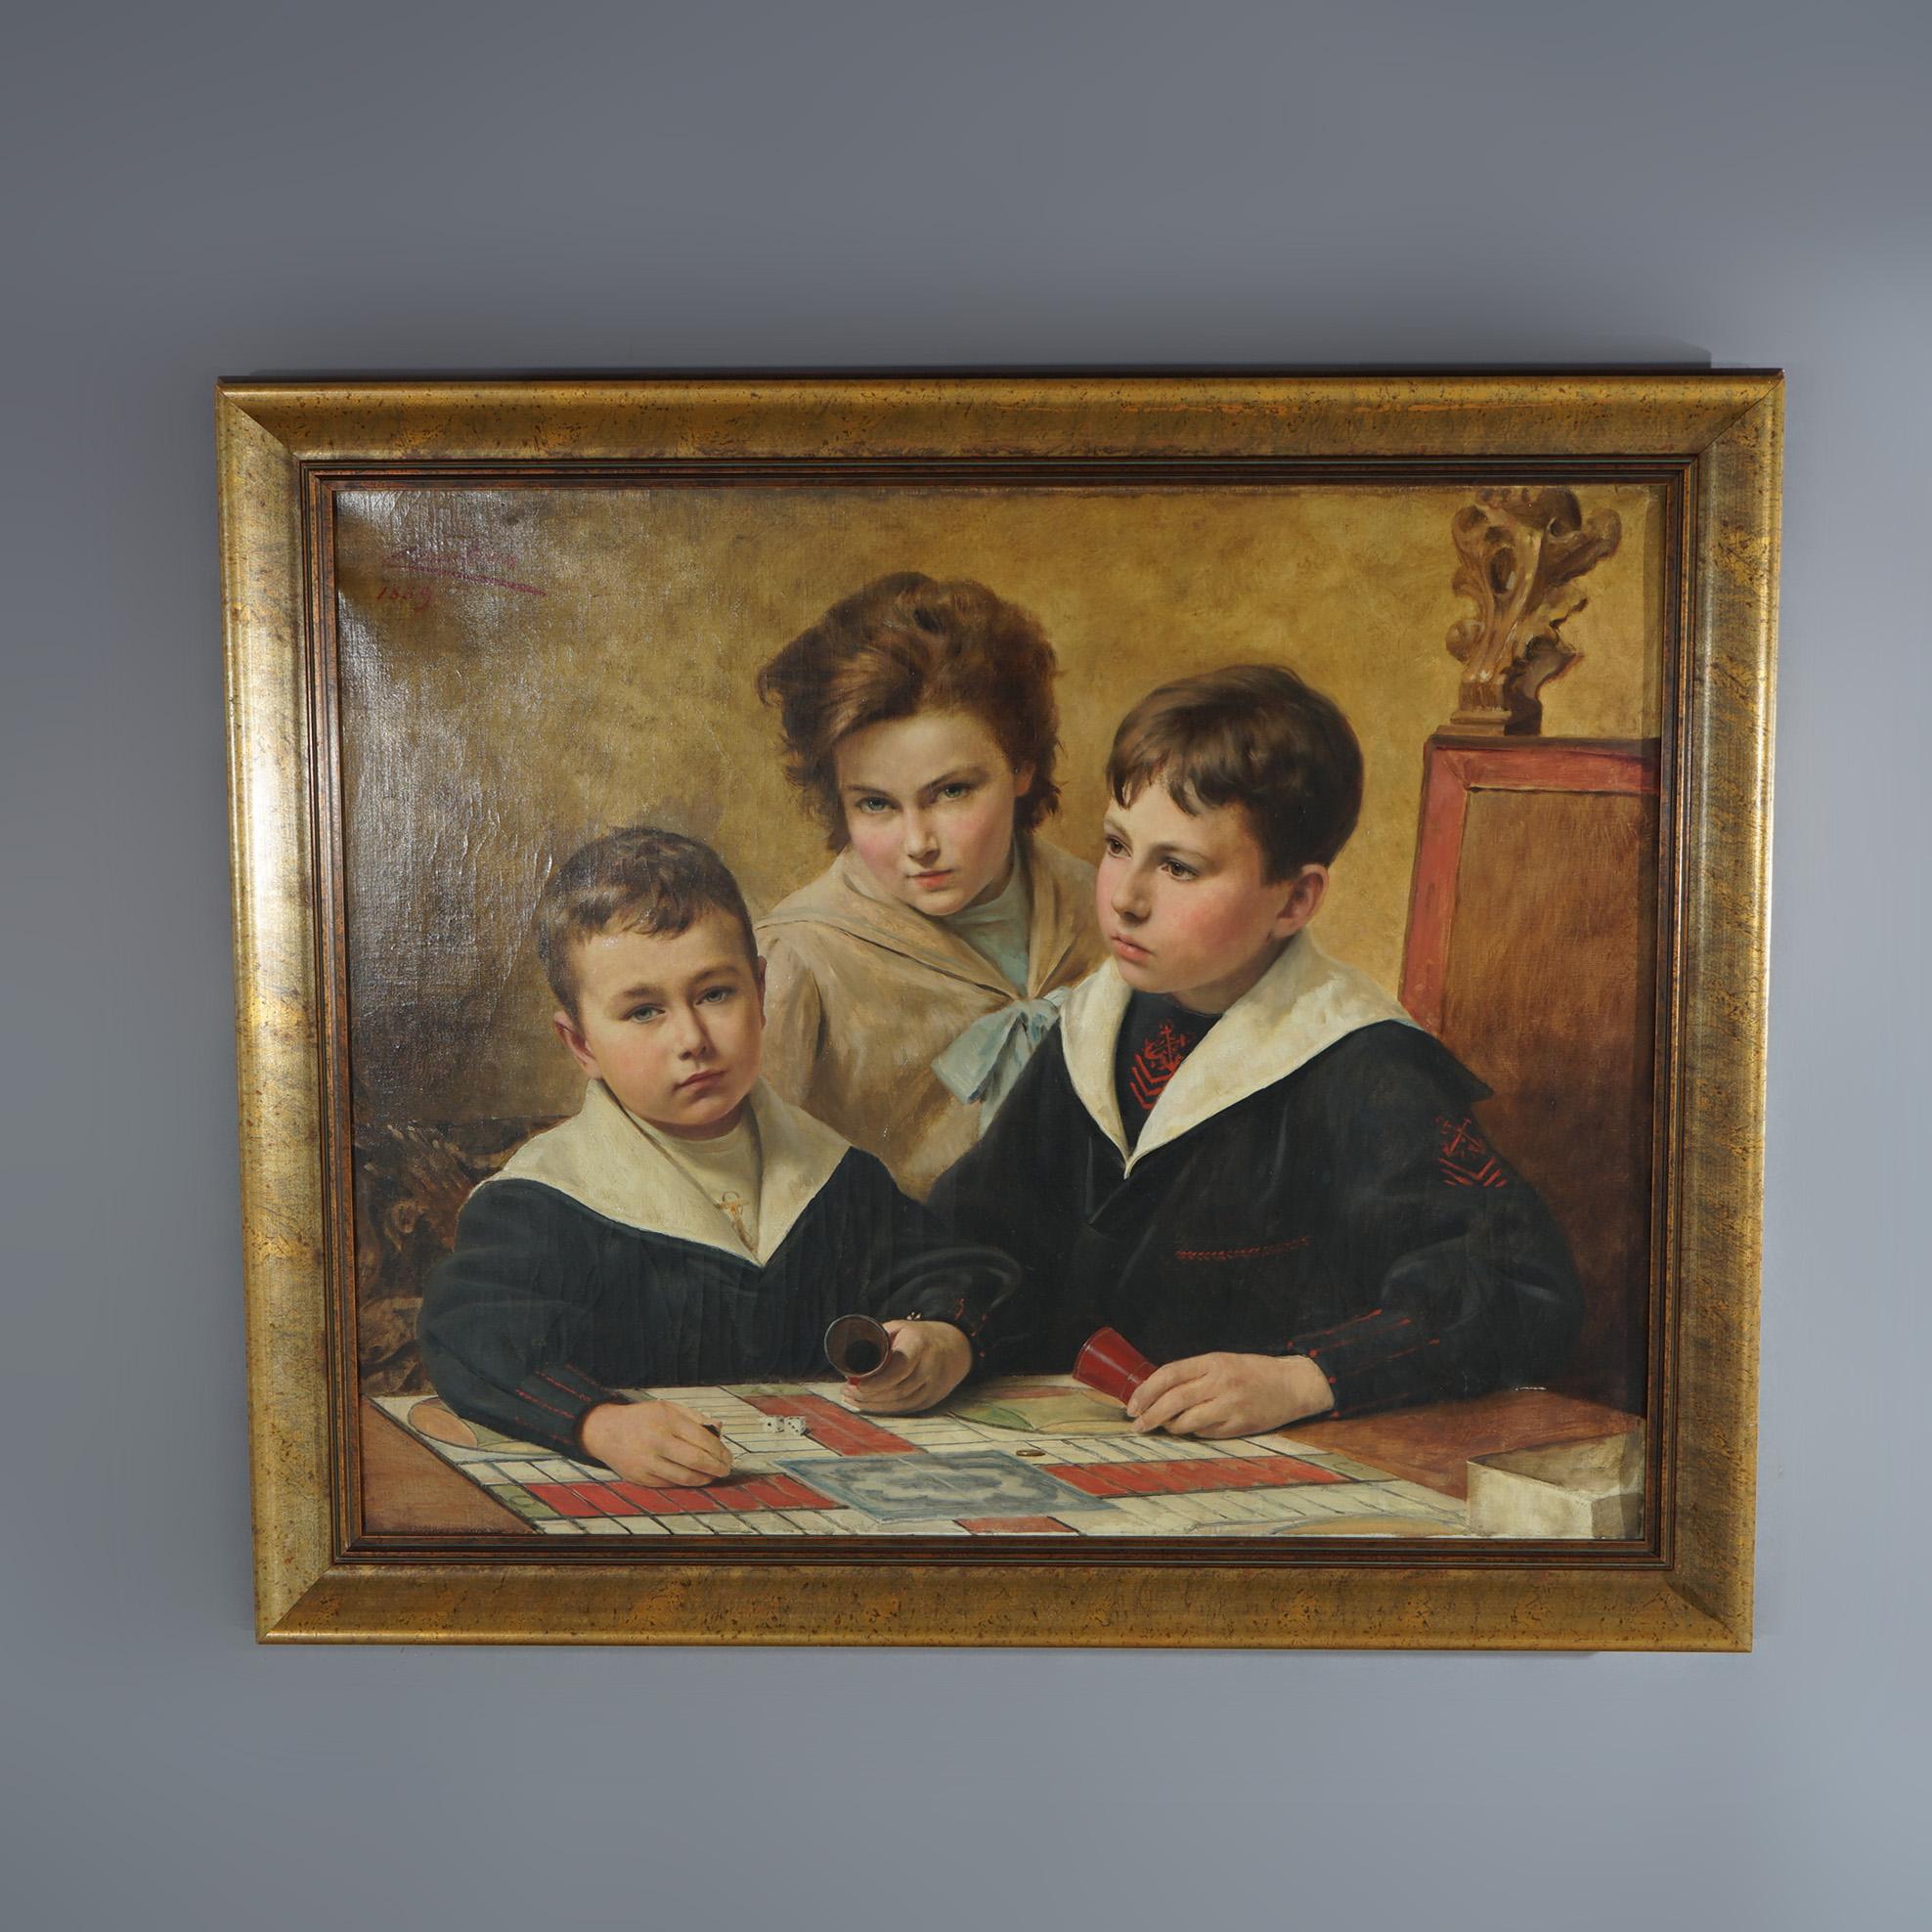 An antique genre painting offers oil on canvas interior scene with children playing Parecheessi (board game), artist signed and dated, seated in giltwood frame, c1889

Oil Painting O/C Children Playing Parcheesi, Signed T. Chartran Dated